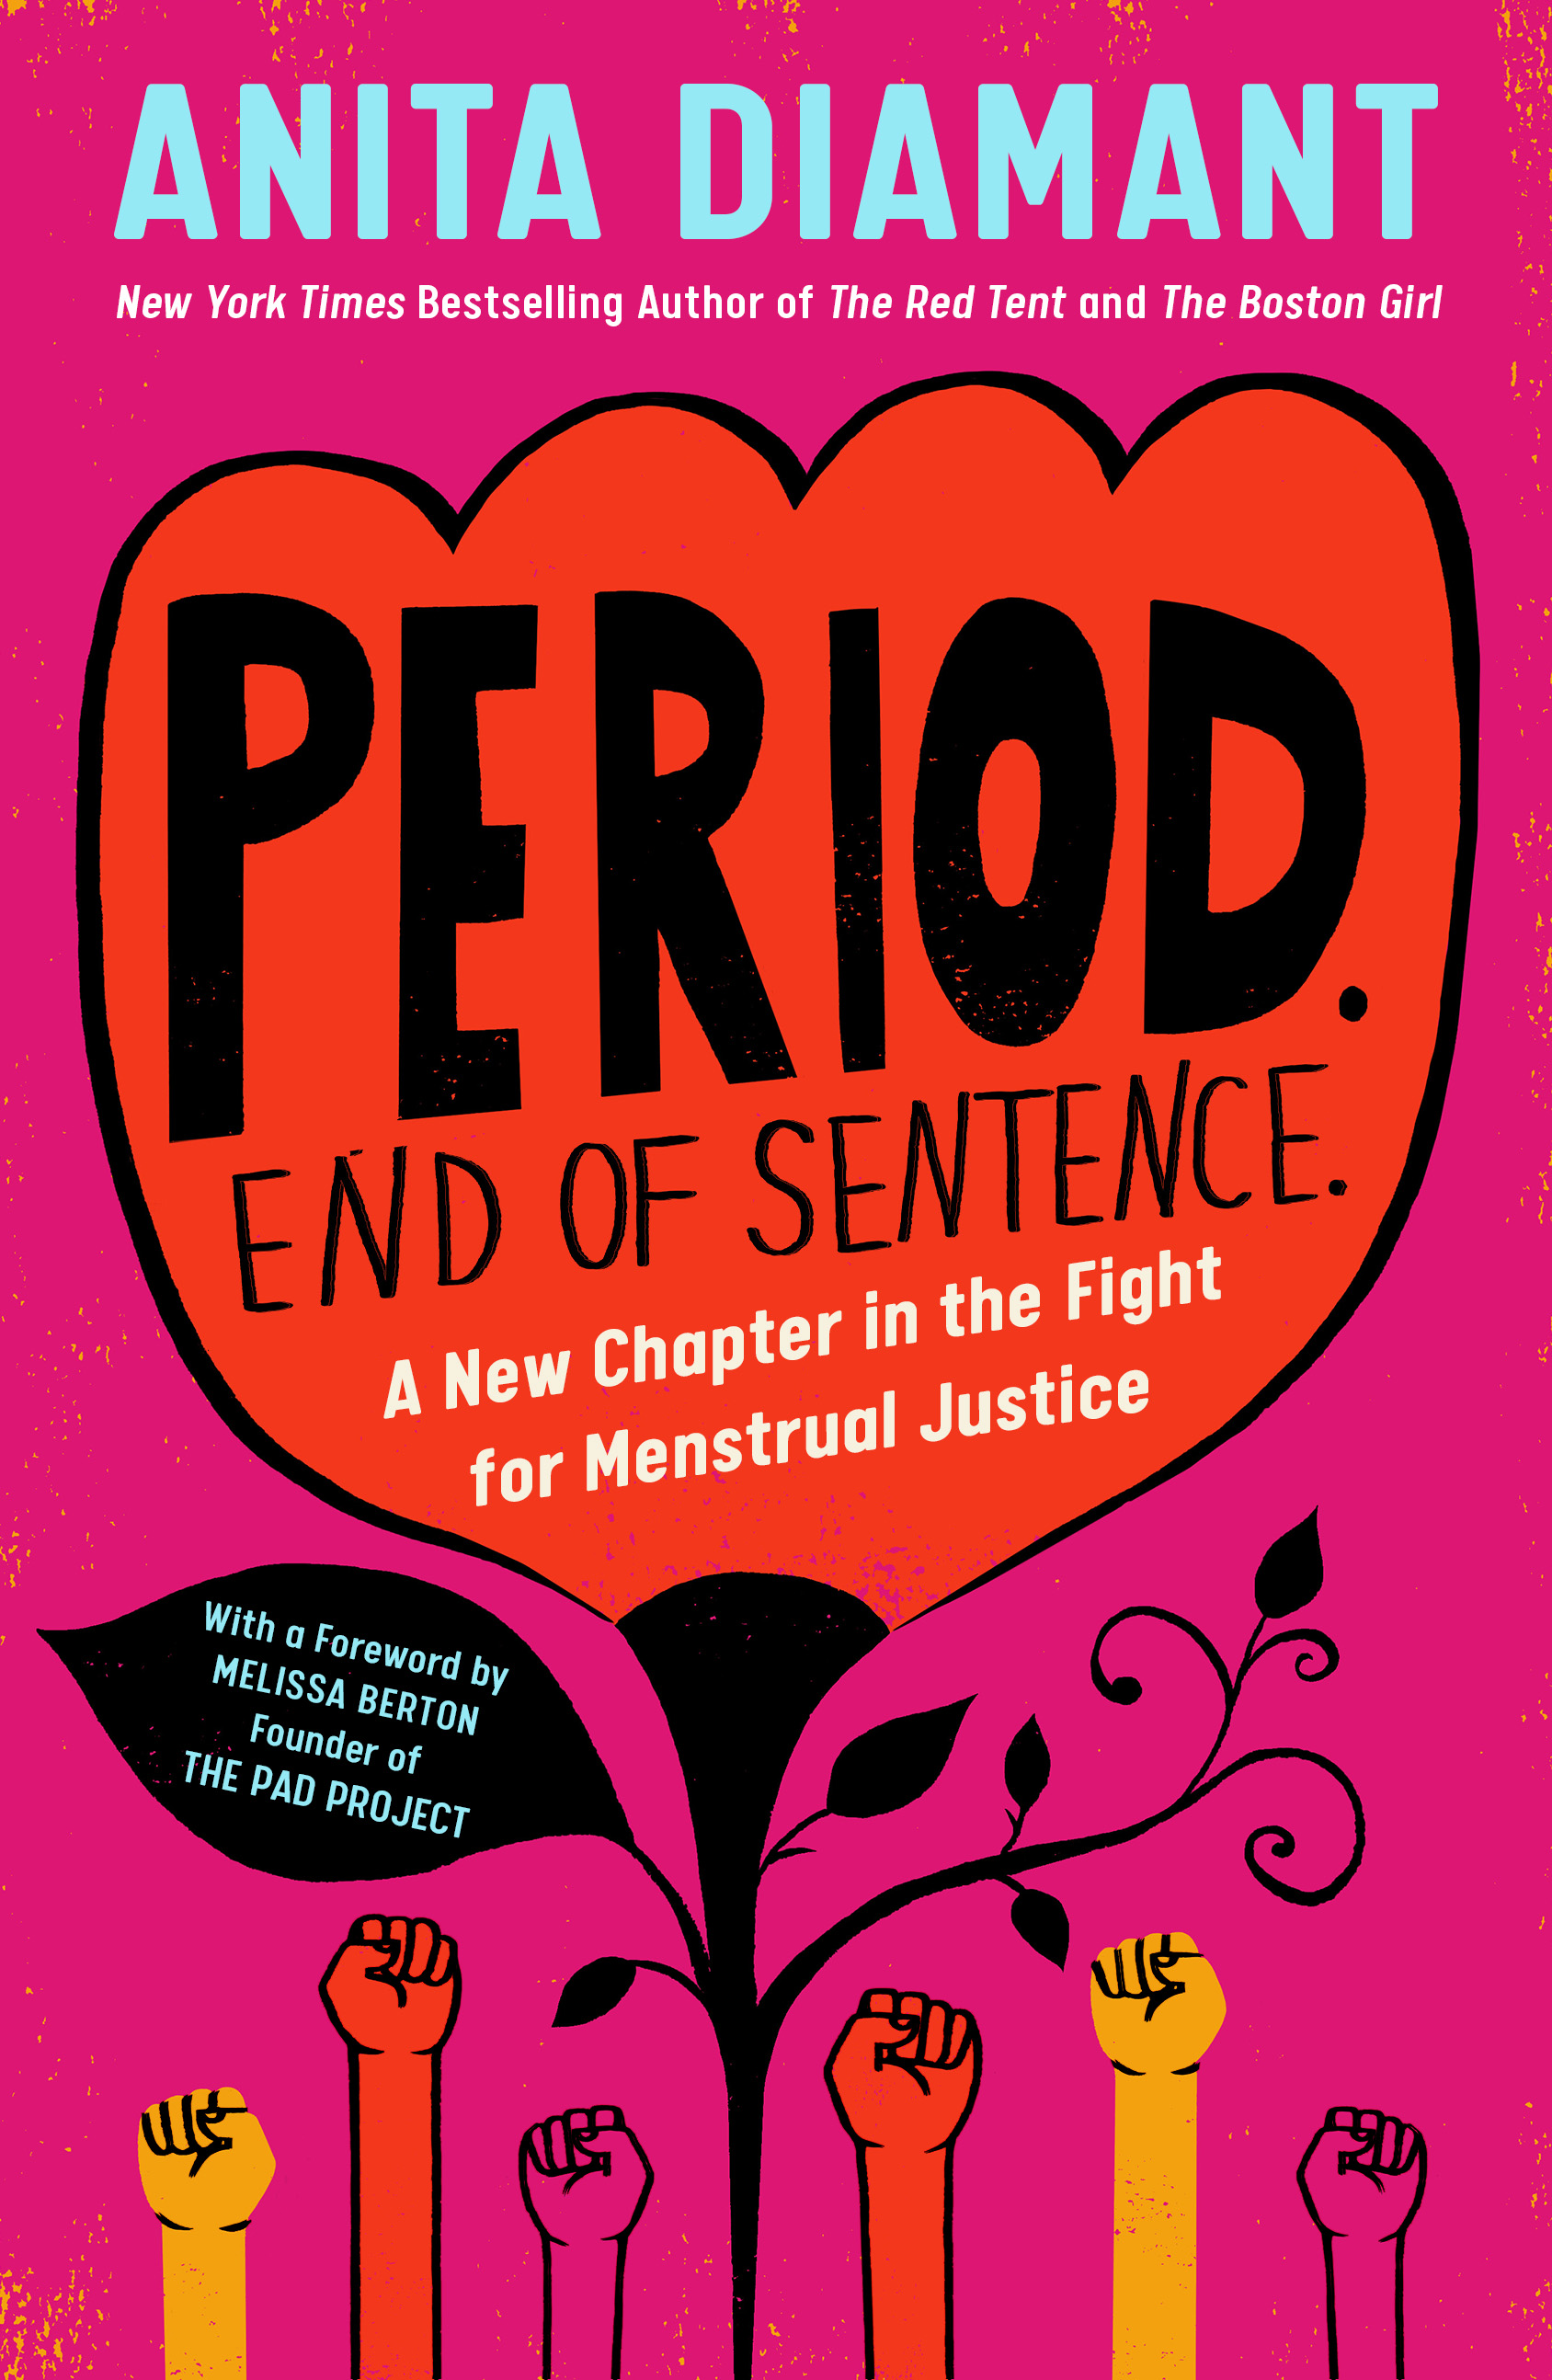 PERIOD END OF SENTENCE cover copy